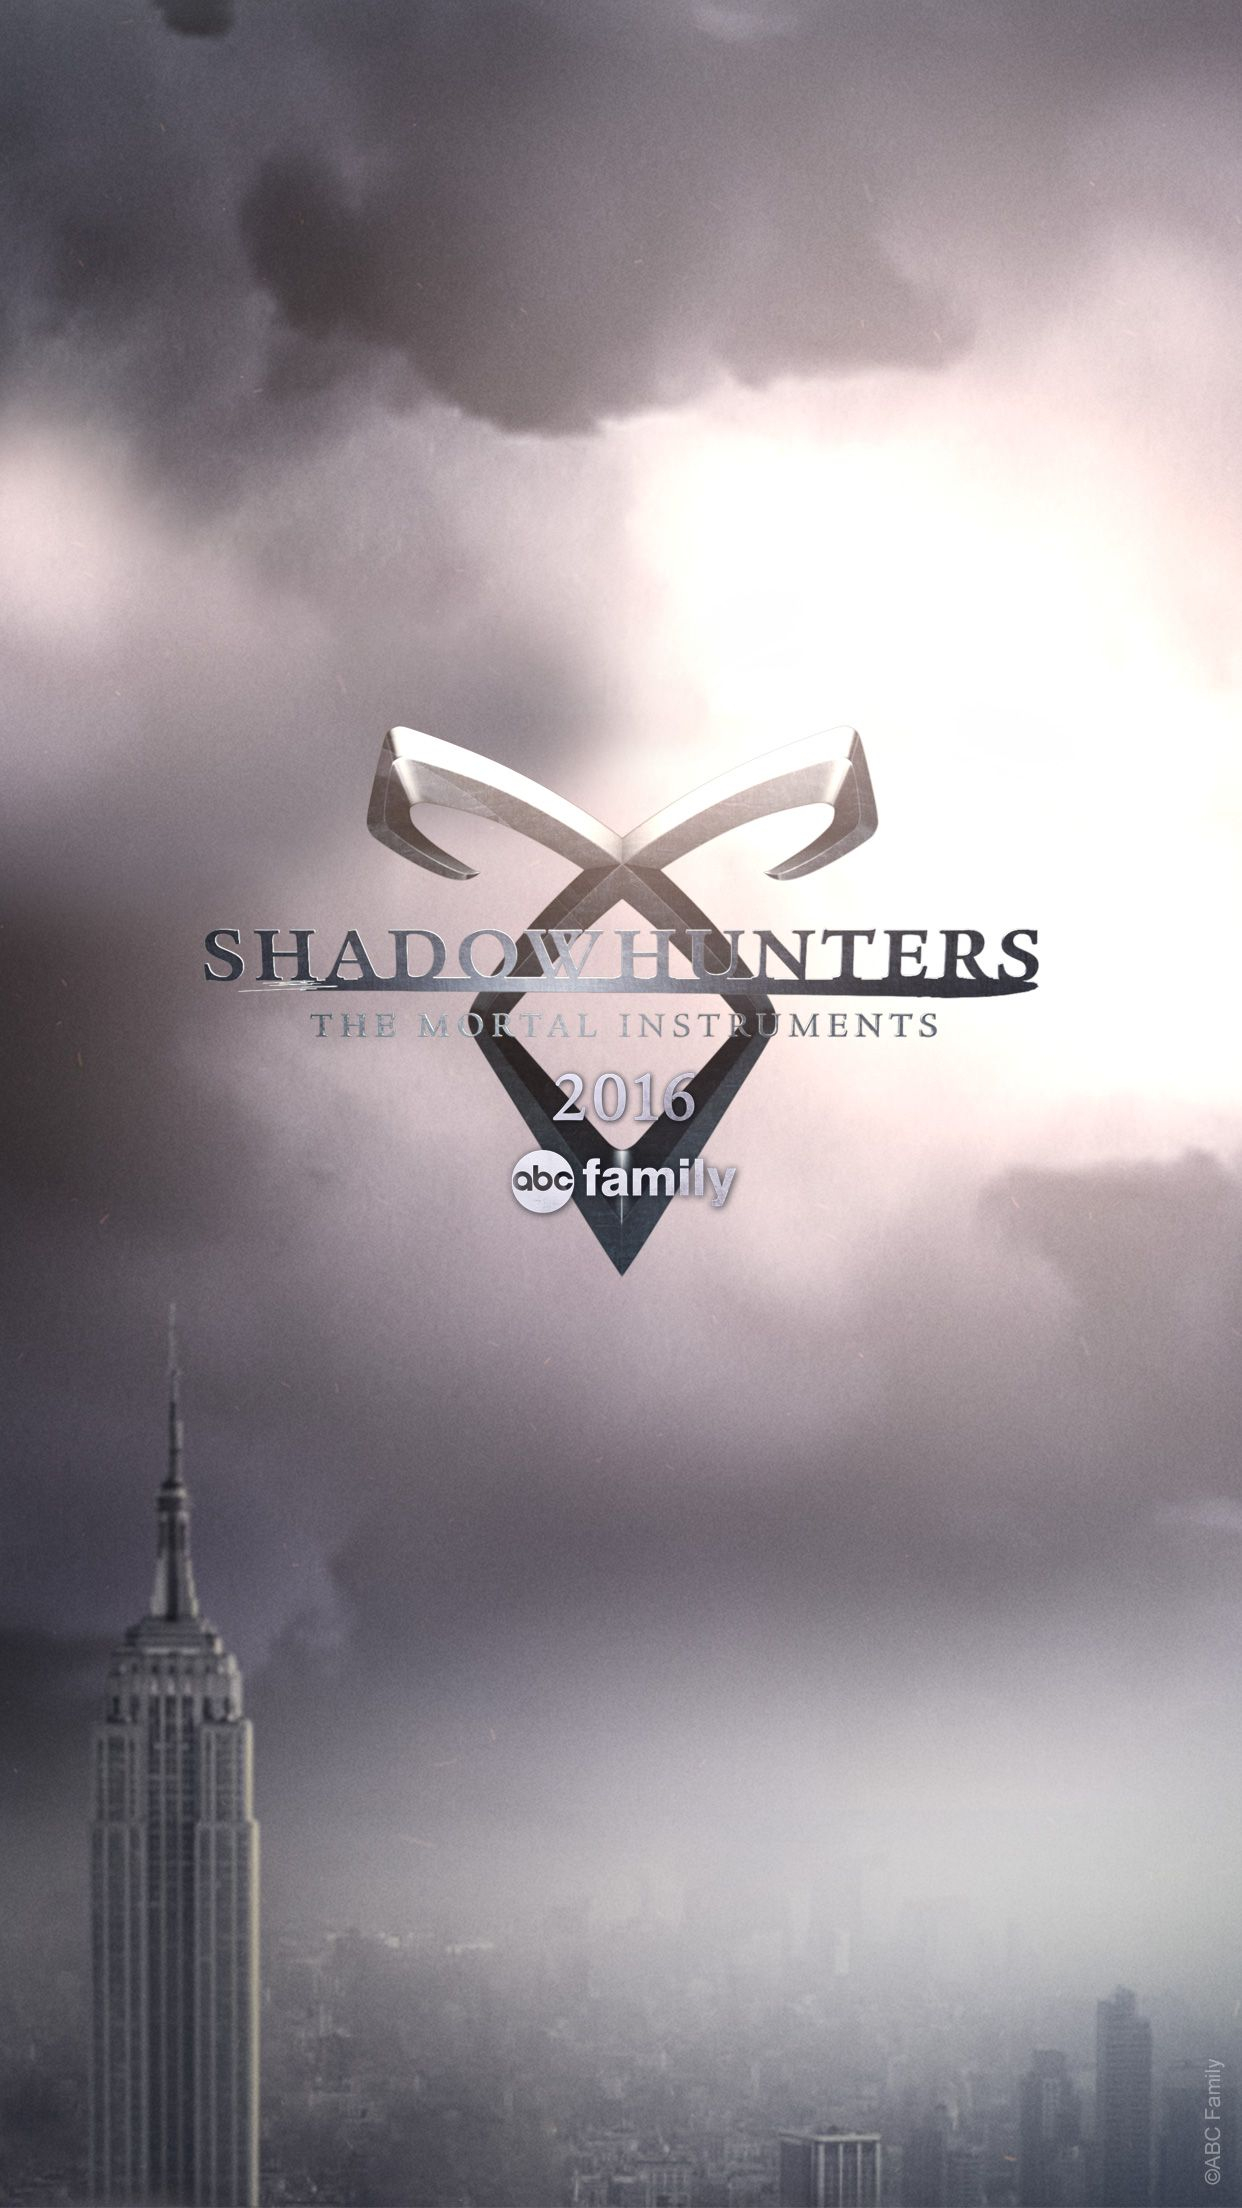 1242x2208 Shadowhunters Mobile Backgrounds to Rock Your World | Shadowhunters, Shadowhunters tv show, Shadowhunters series